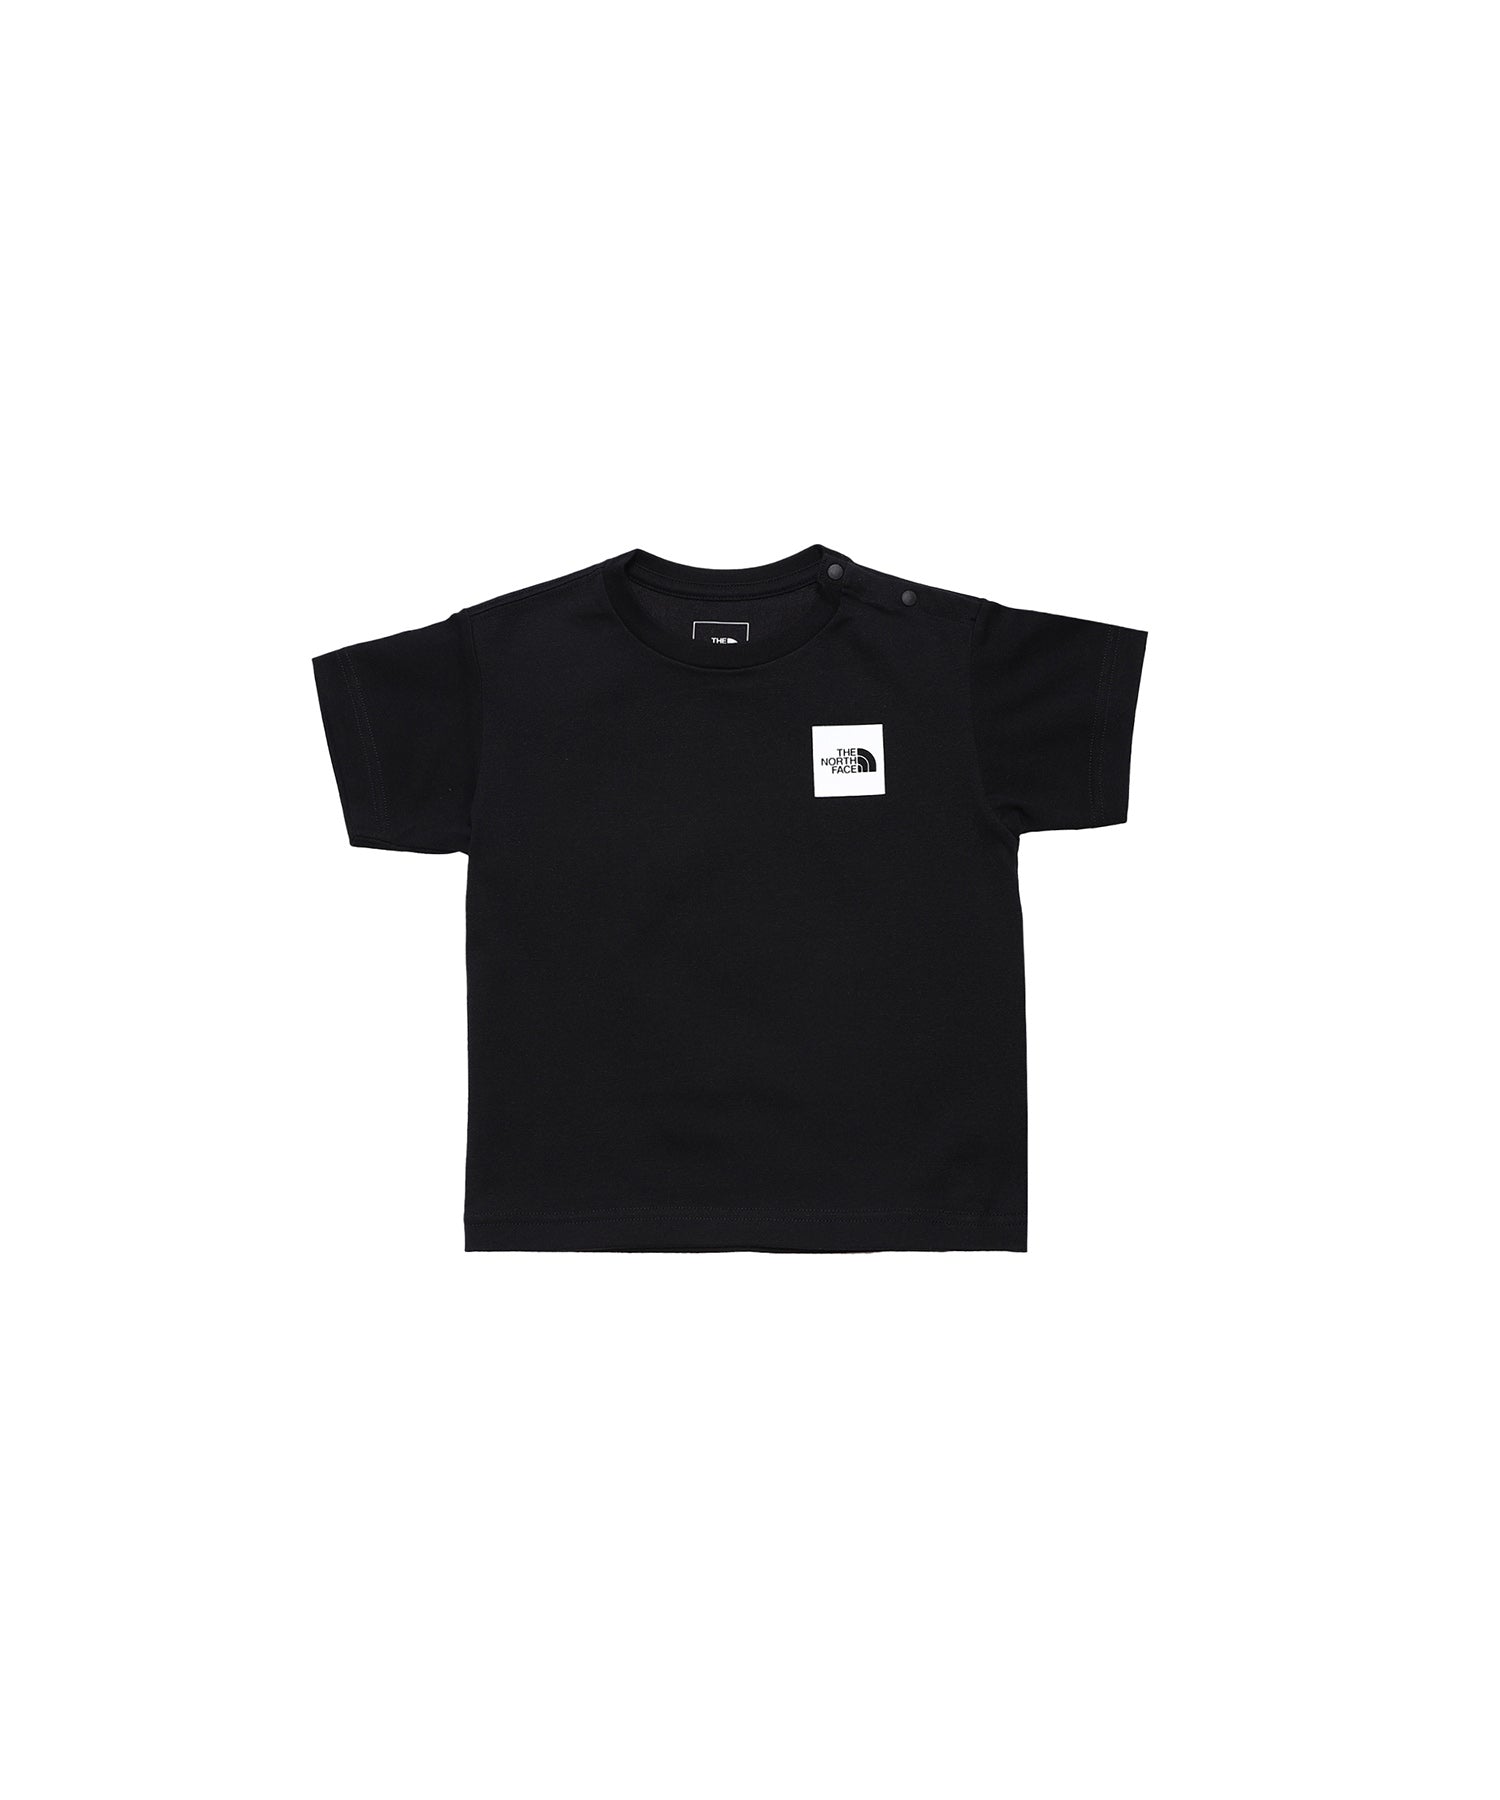 B S/S Small Square Logo Tee